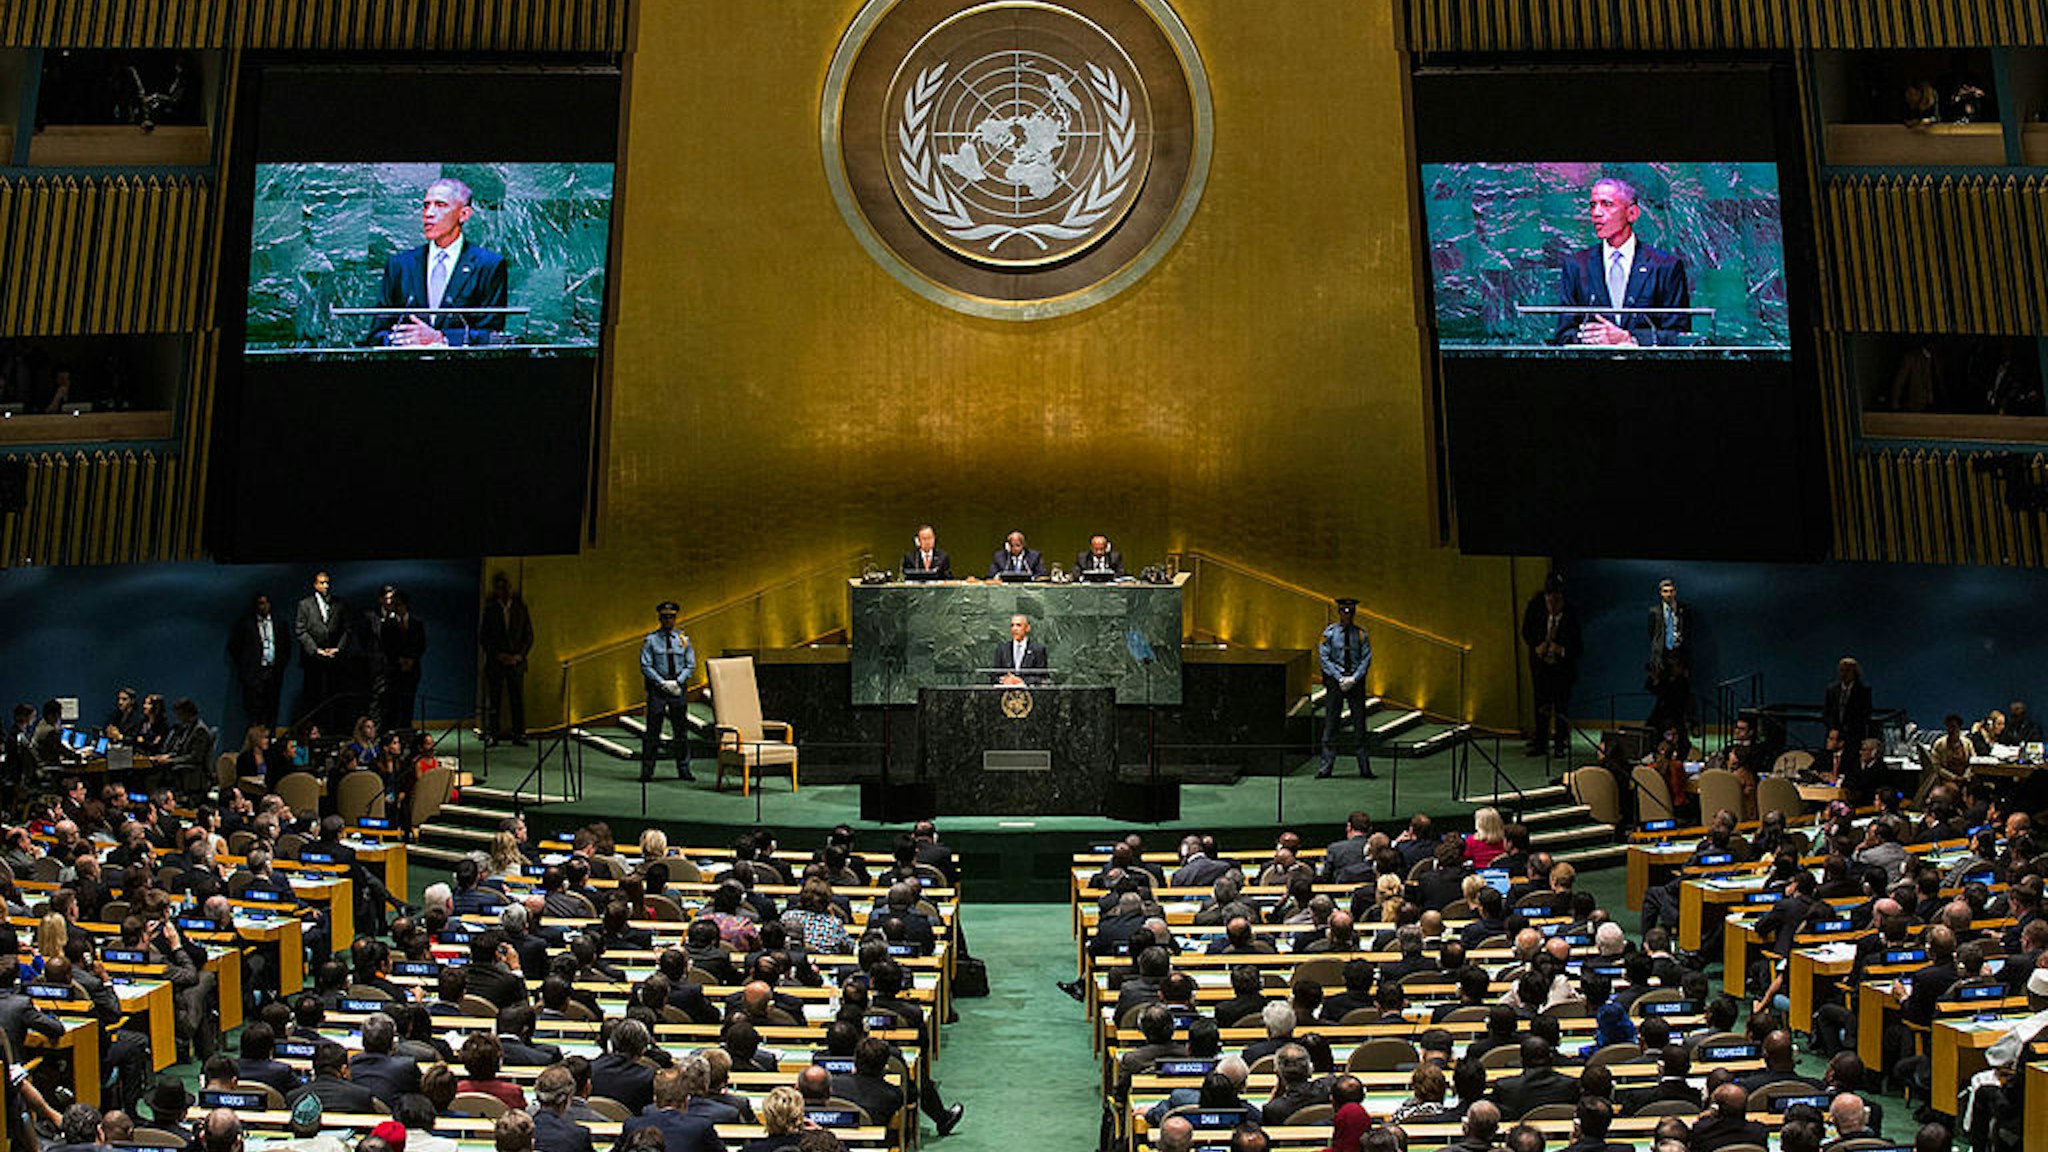 U.S. President Barack Obama speaks at the 69th United Nations General Assembly at United Nations Headquarters on September 24, 2014 in New York City.